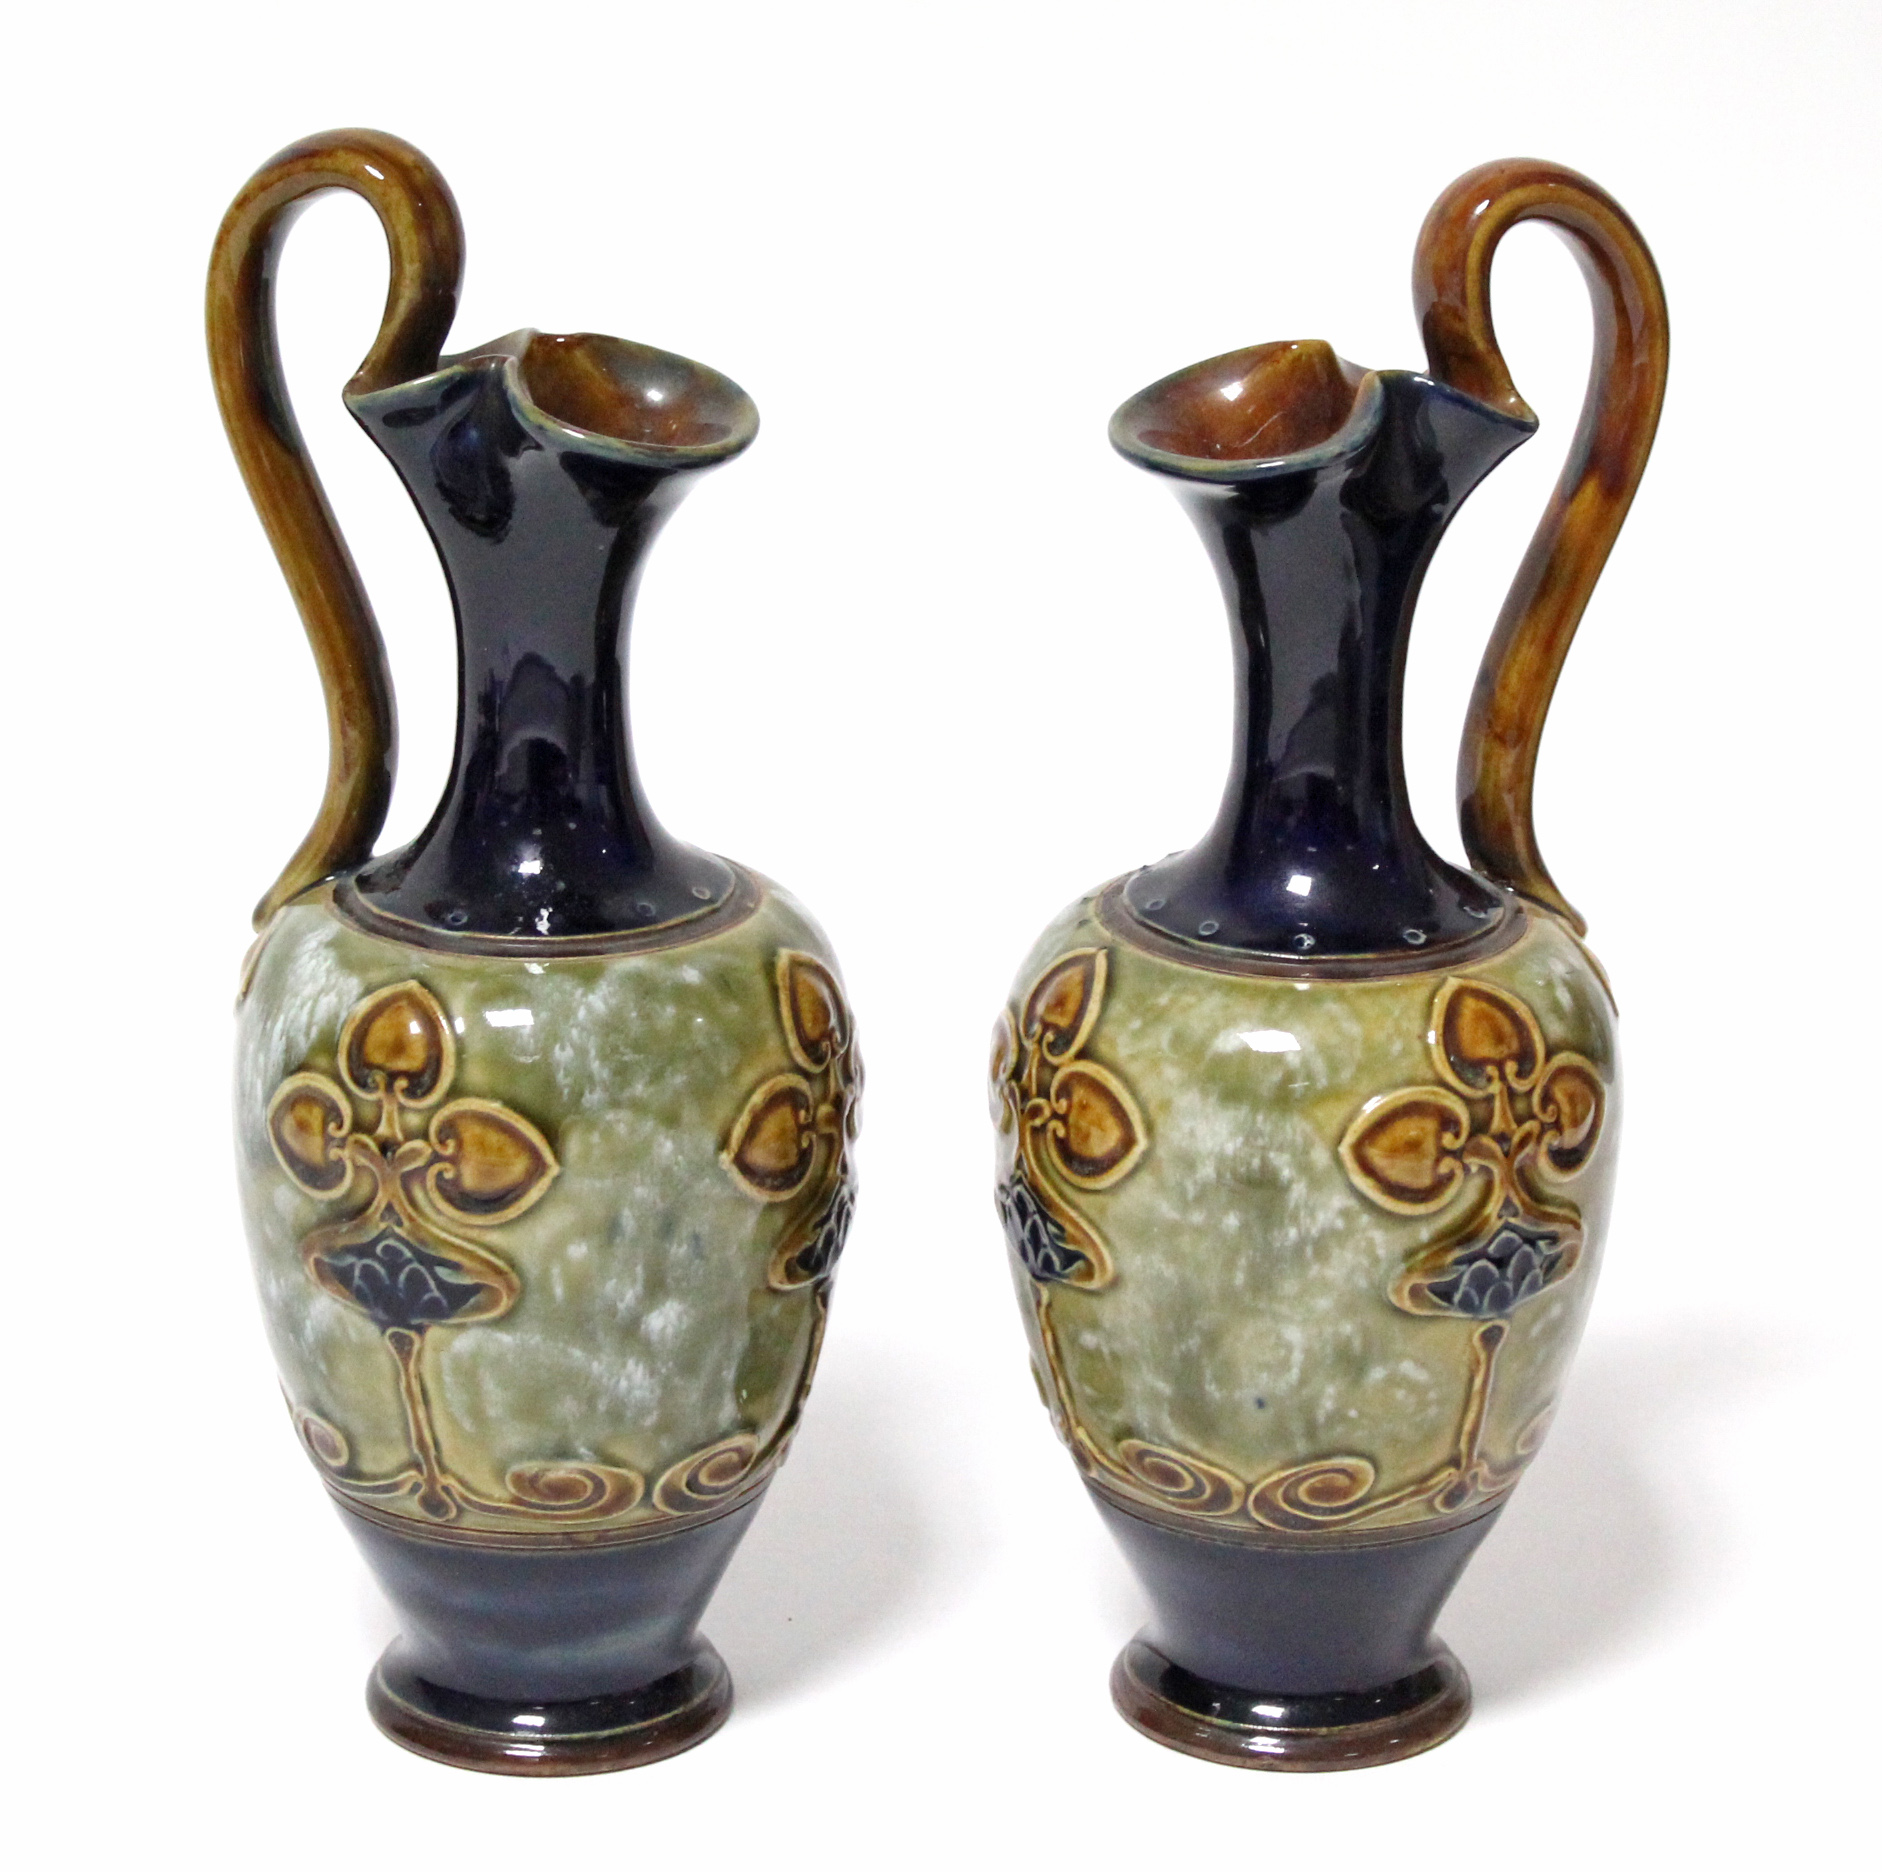 A pair of Royal Doulton stoneware ewers with art nouveau stylised floral motifs; 9½” high.